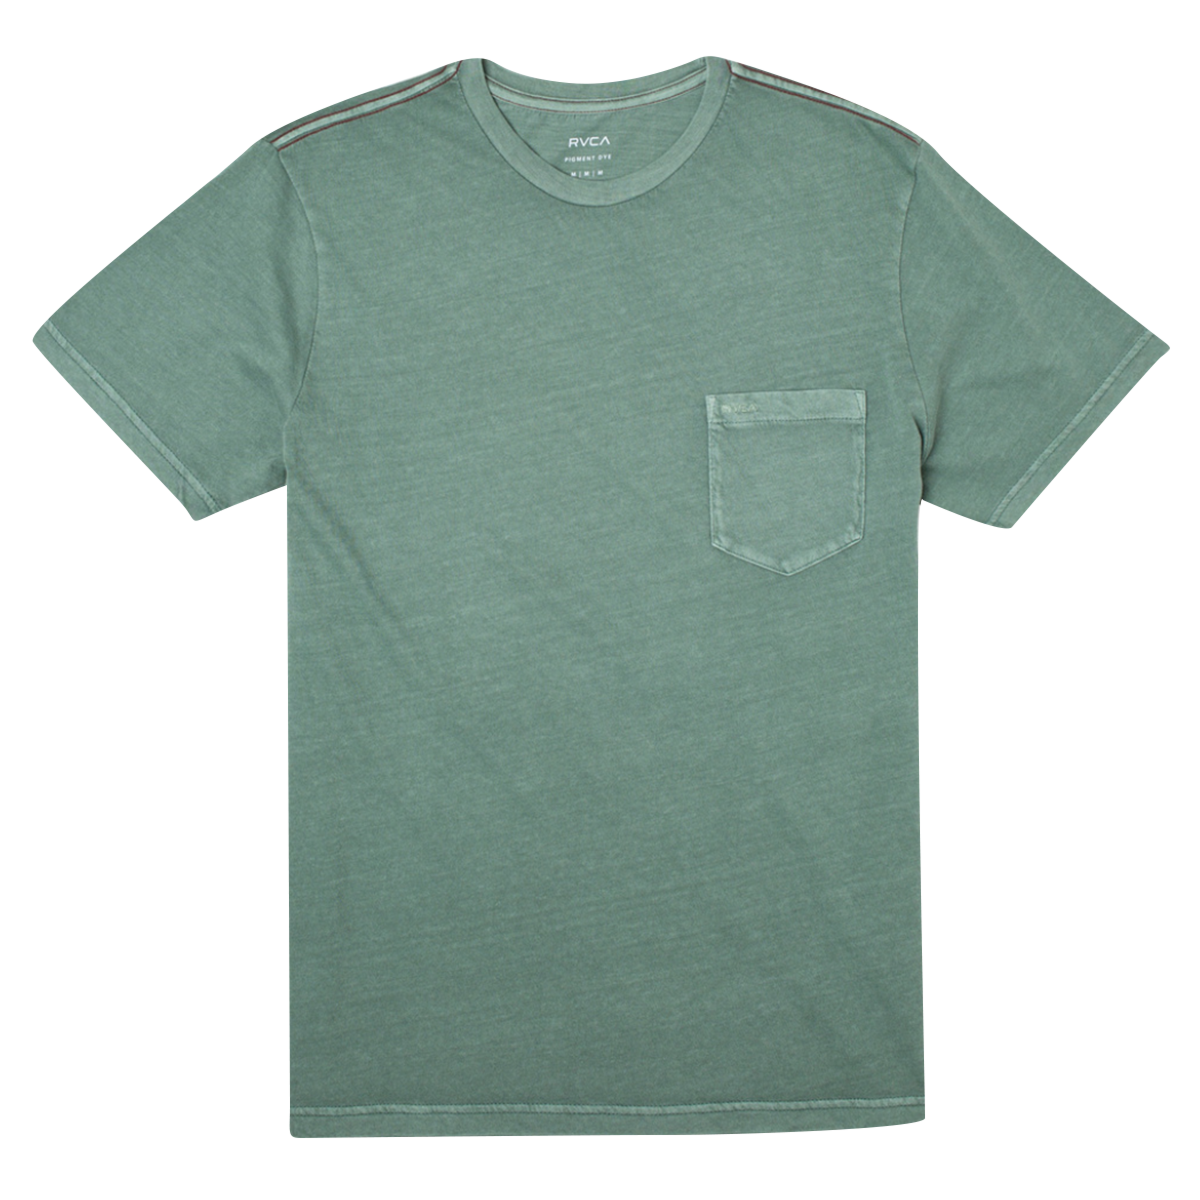 RVCA PTC 2 Pigment Tee - Spinach – Town City